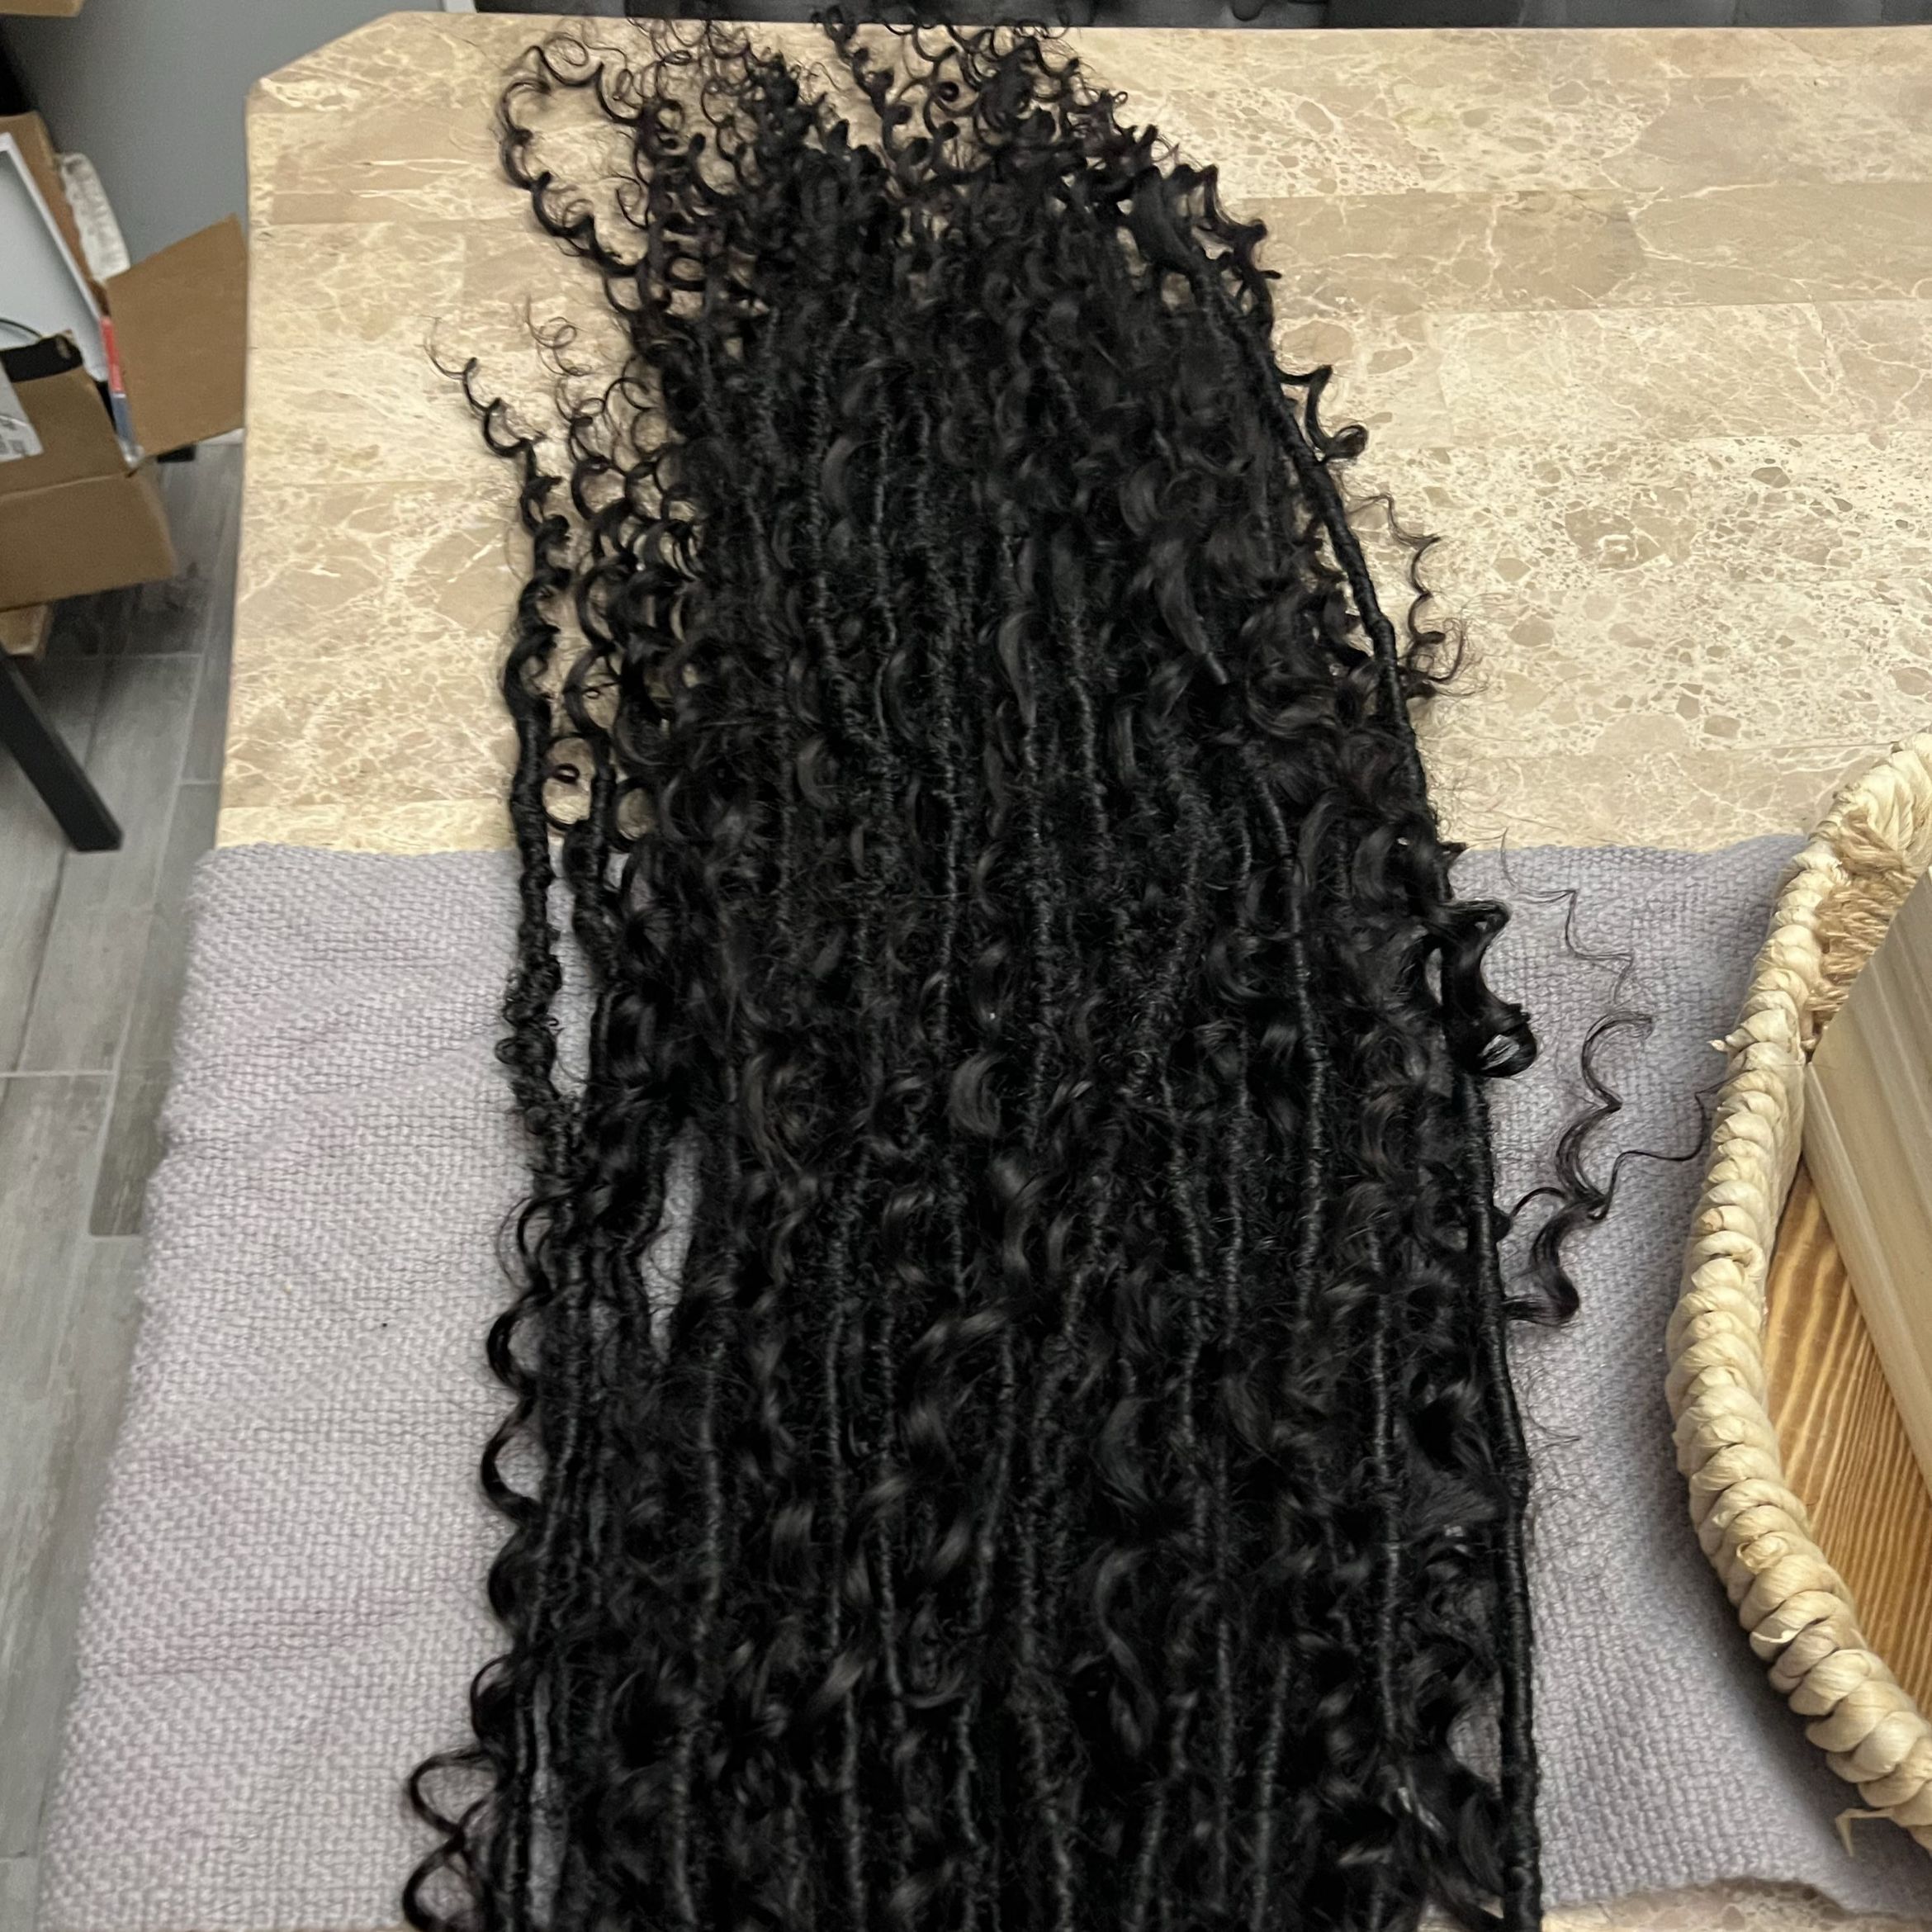 Faux (Synthetic) Locs with Human Hair portfolio